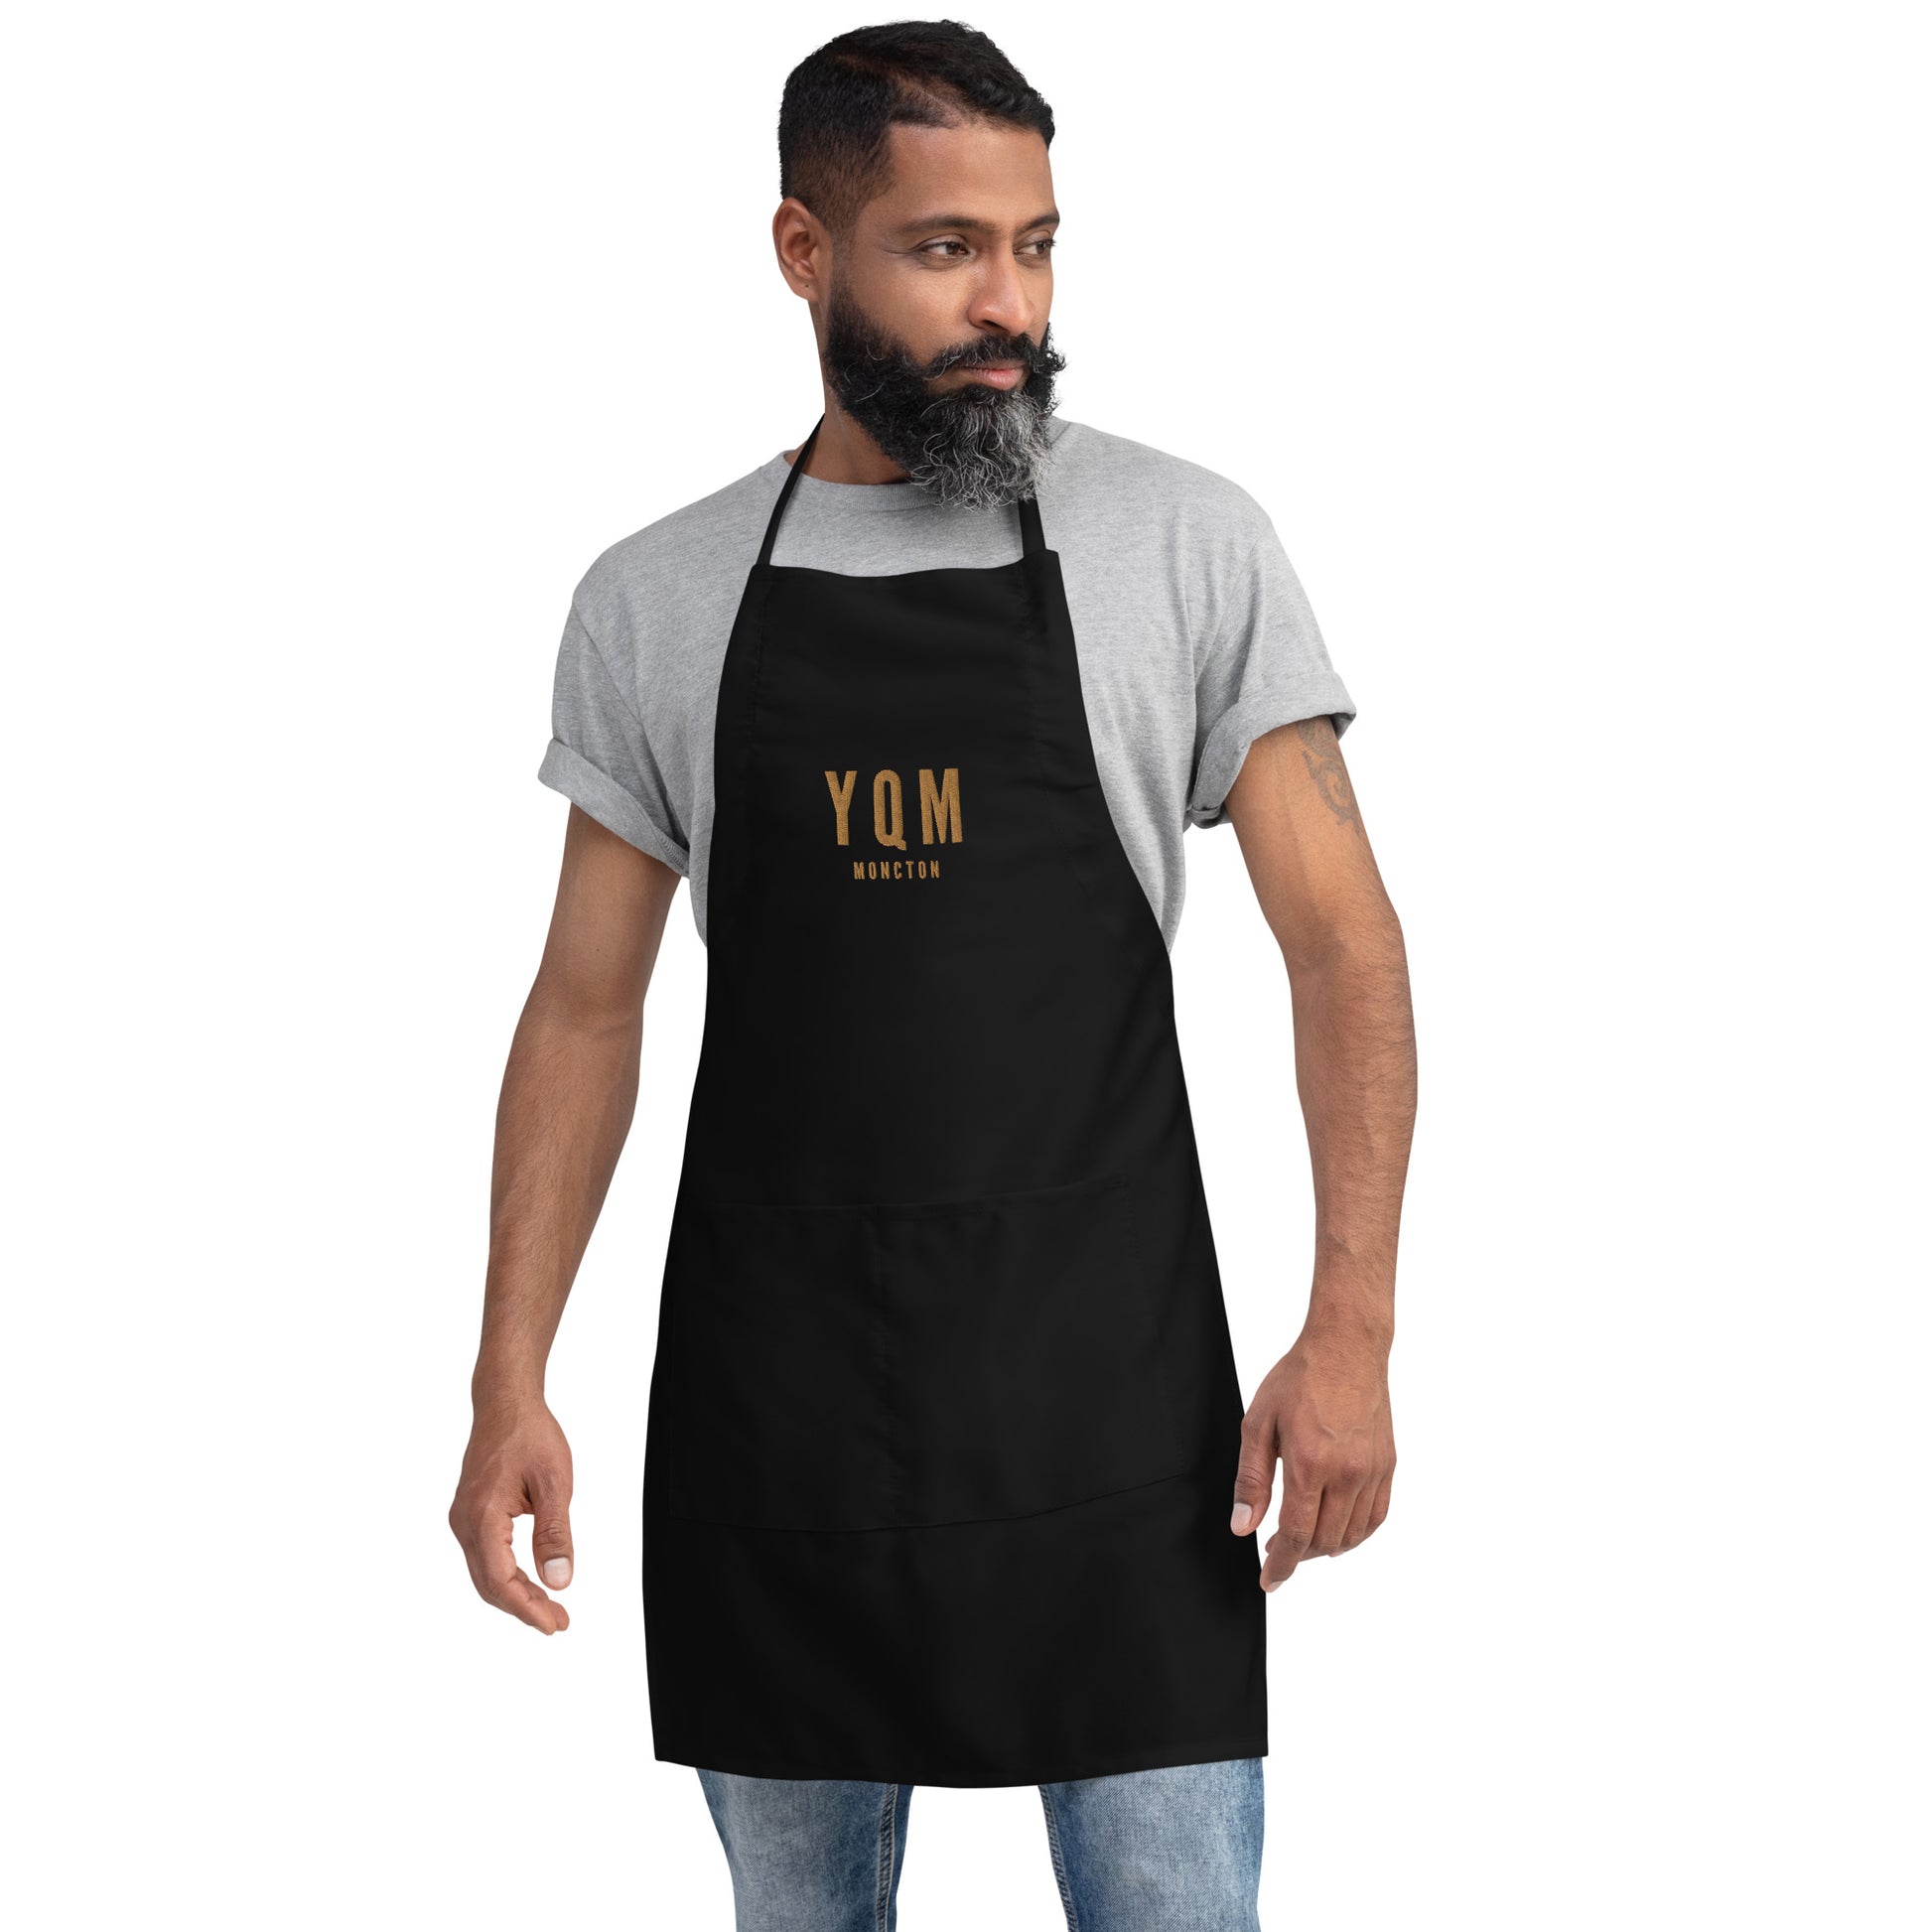 City Embroidered Apron - Old Gold • YQM Moncton • YHM Designs - Image 05